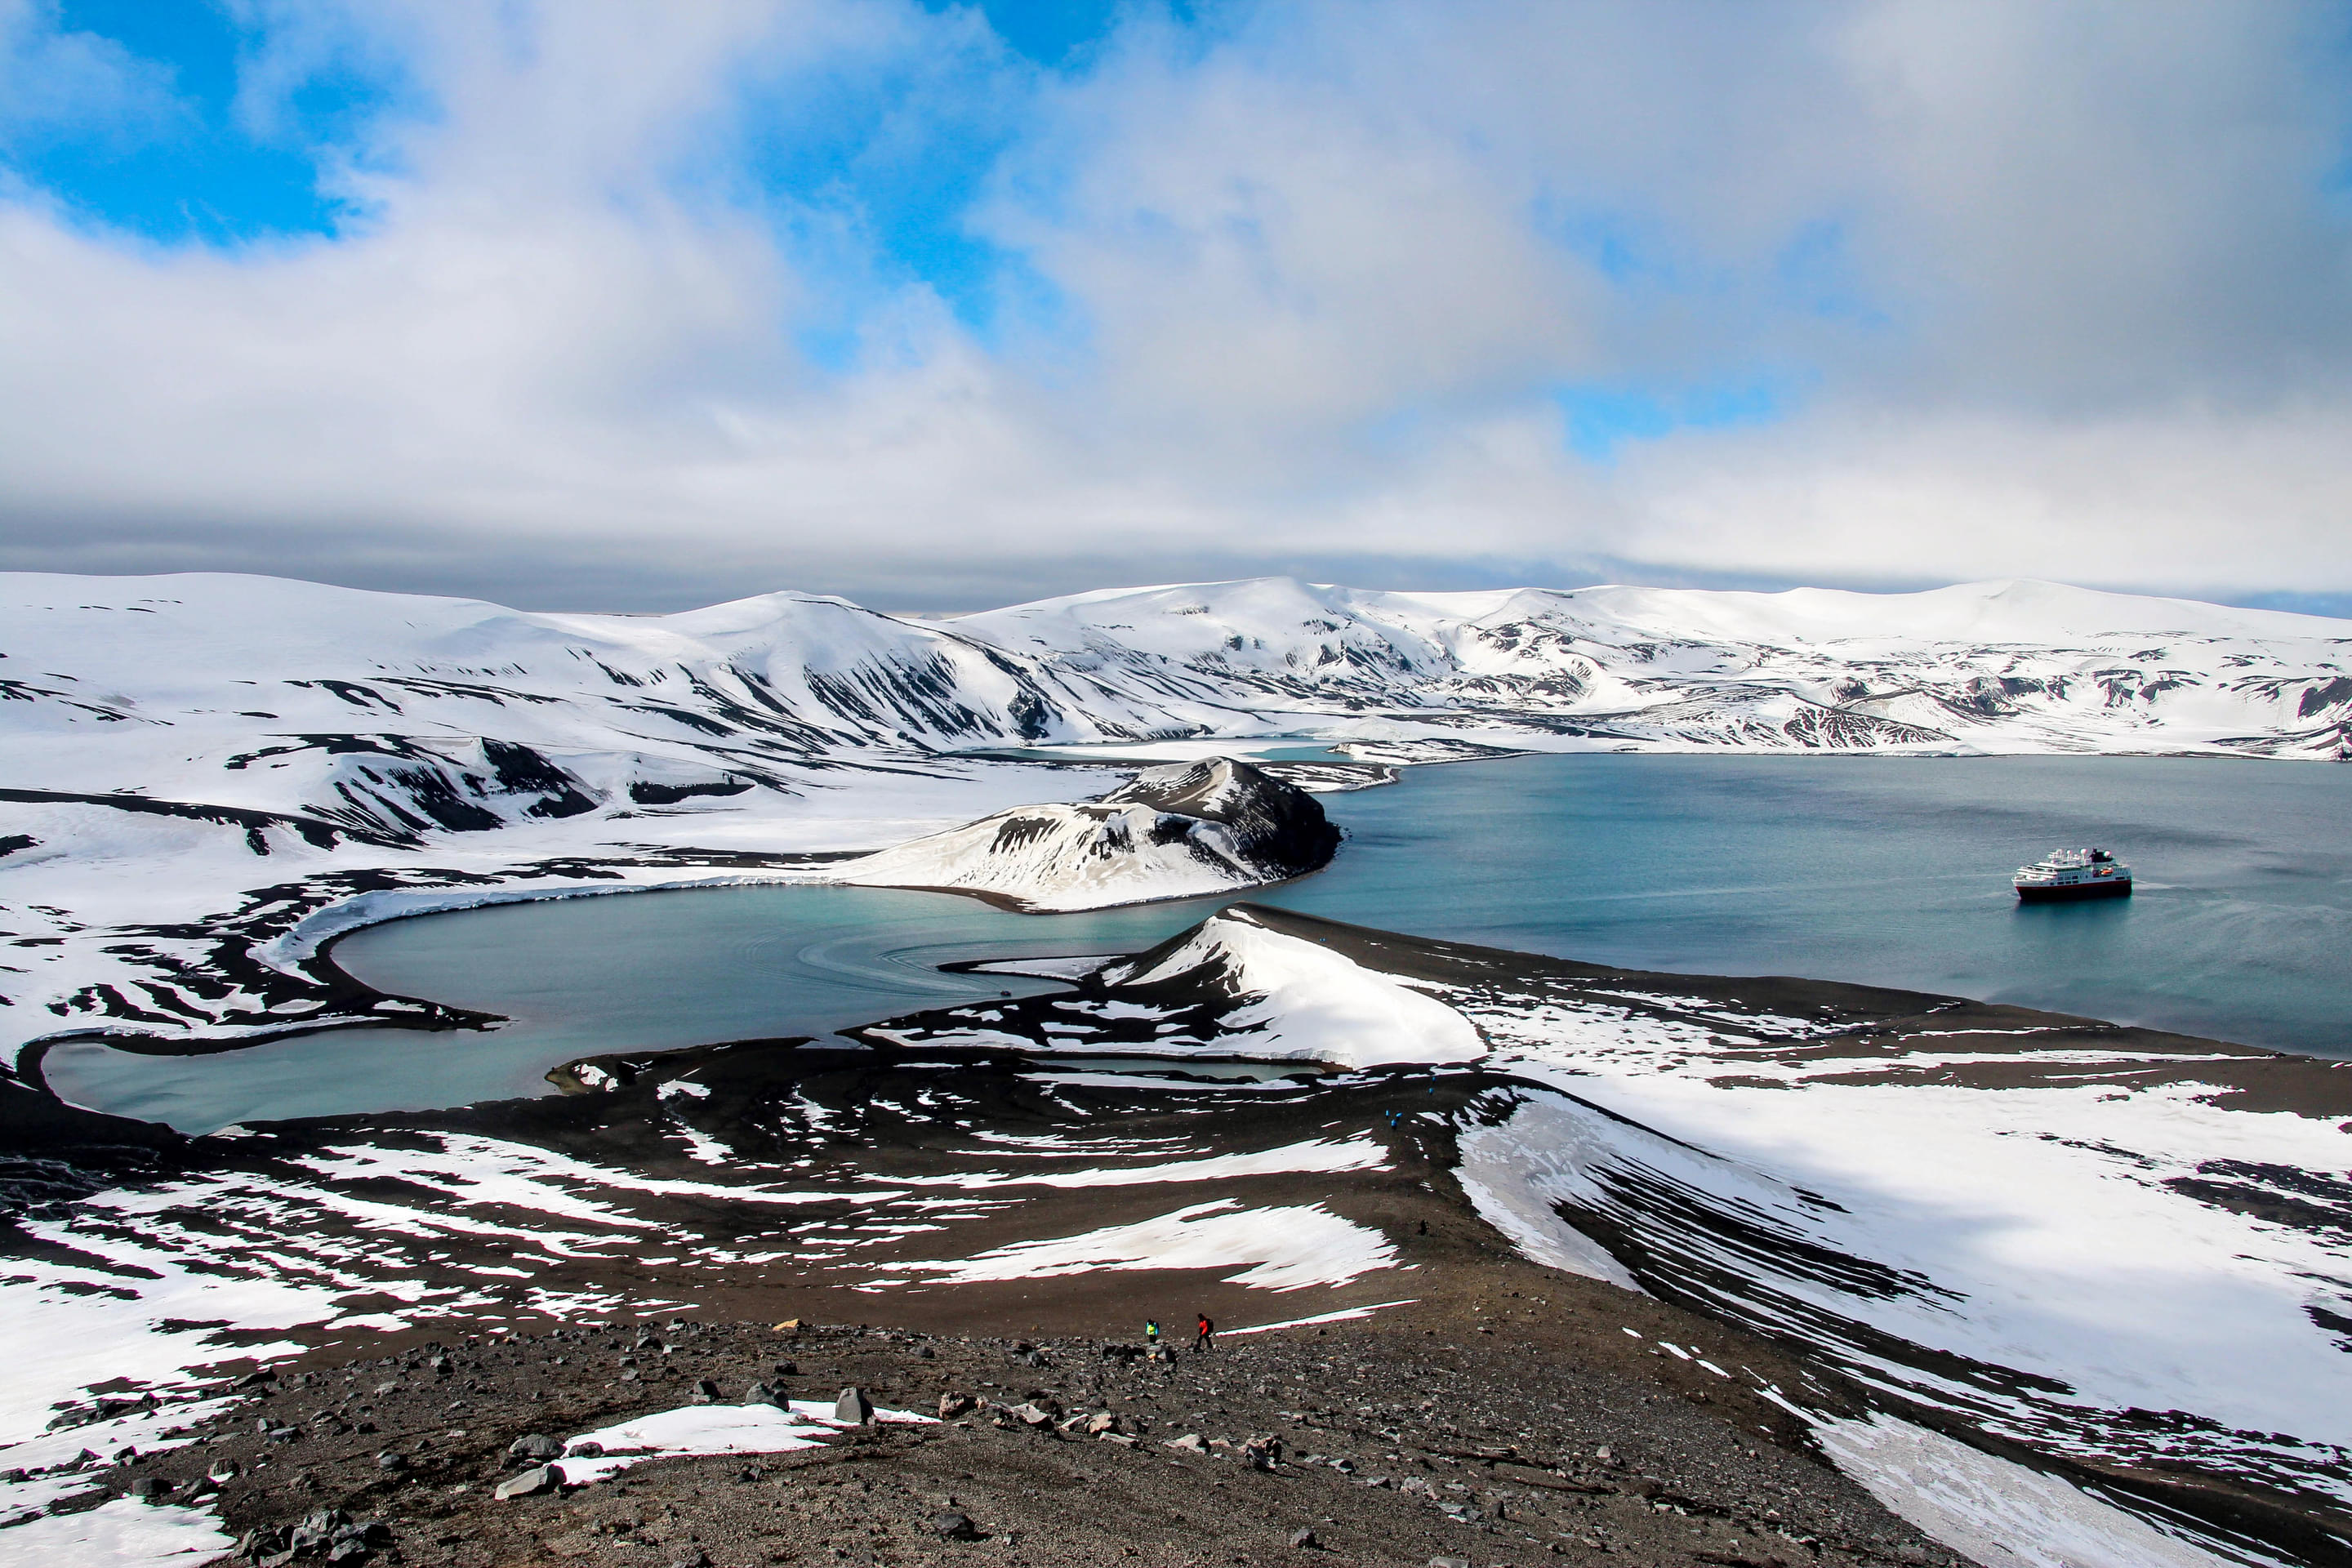 Deception Island Overview